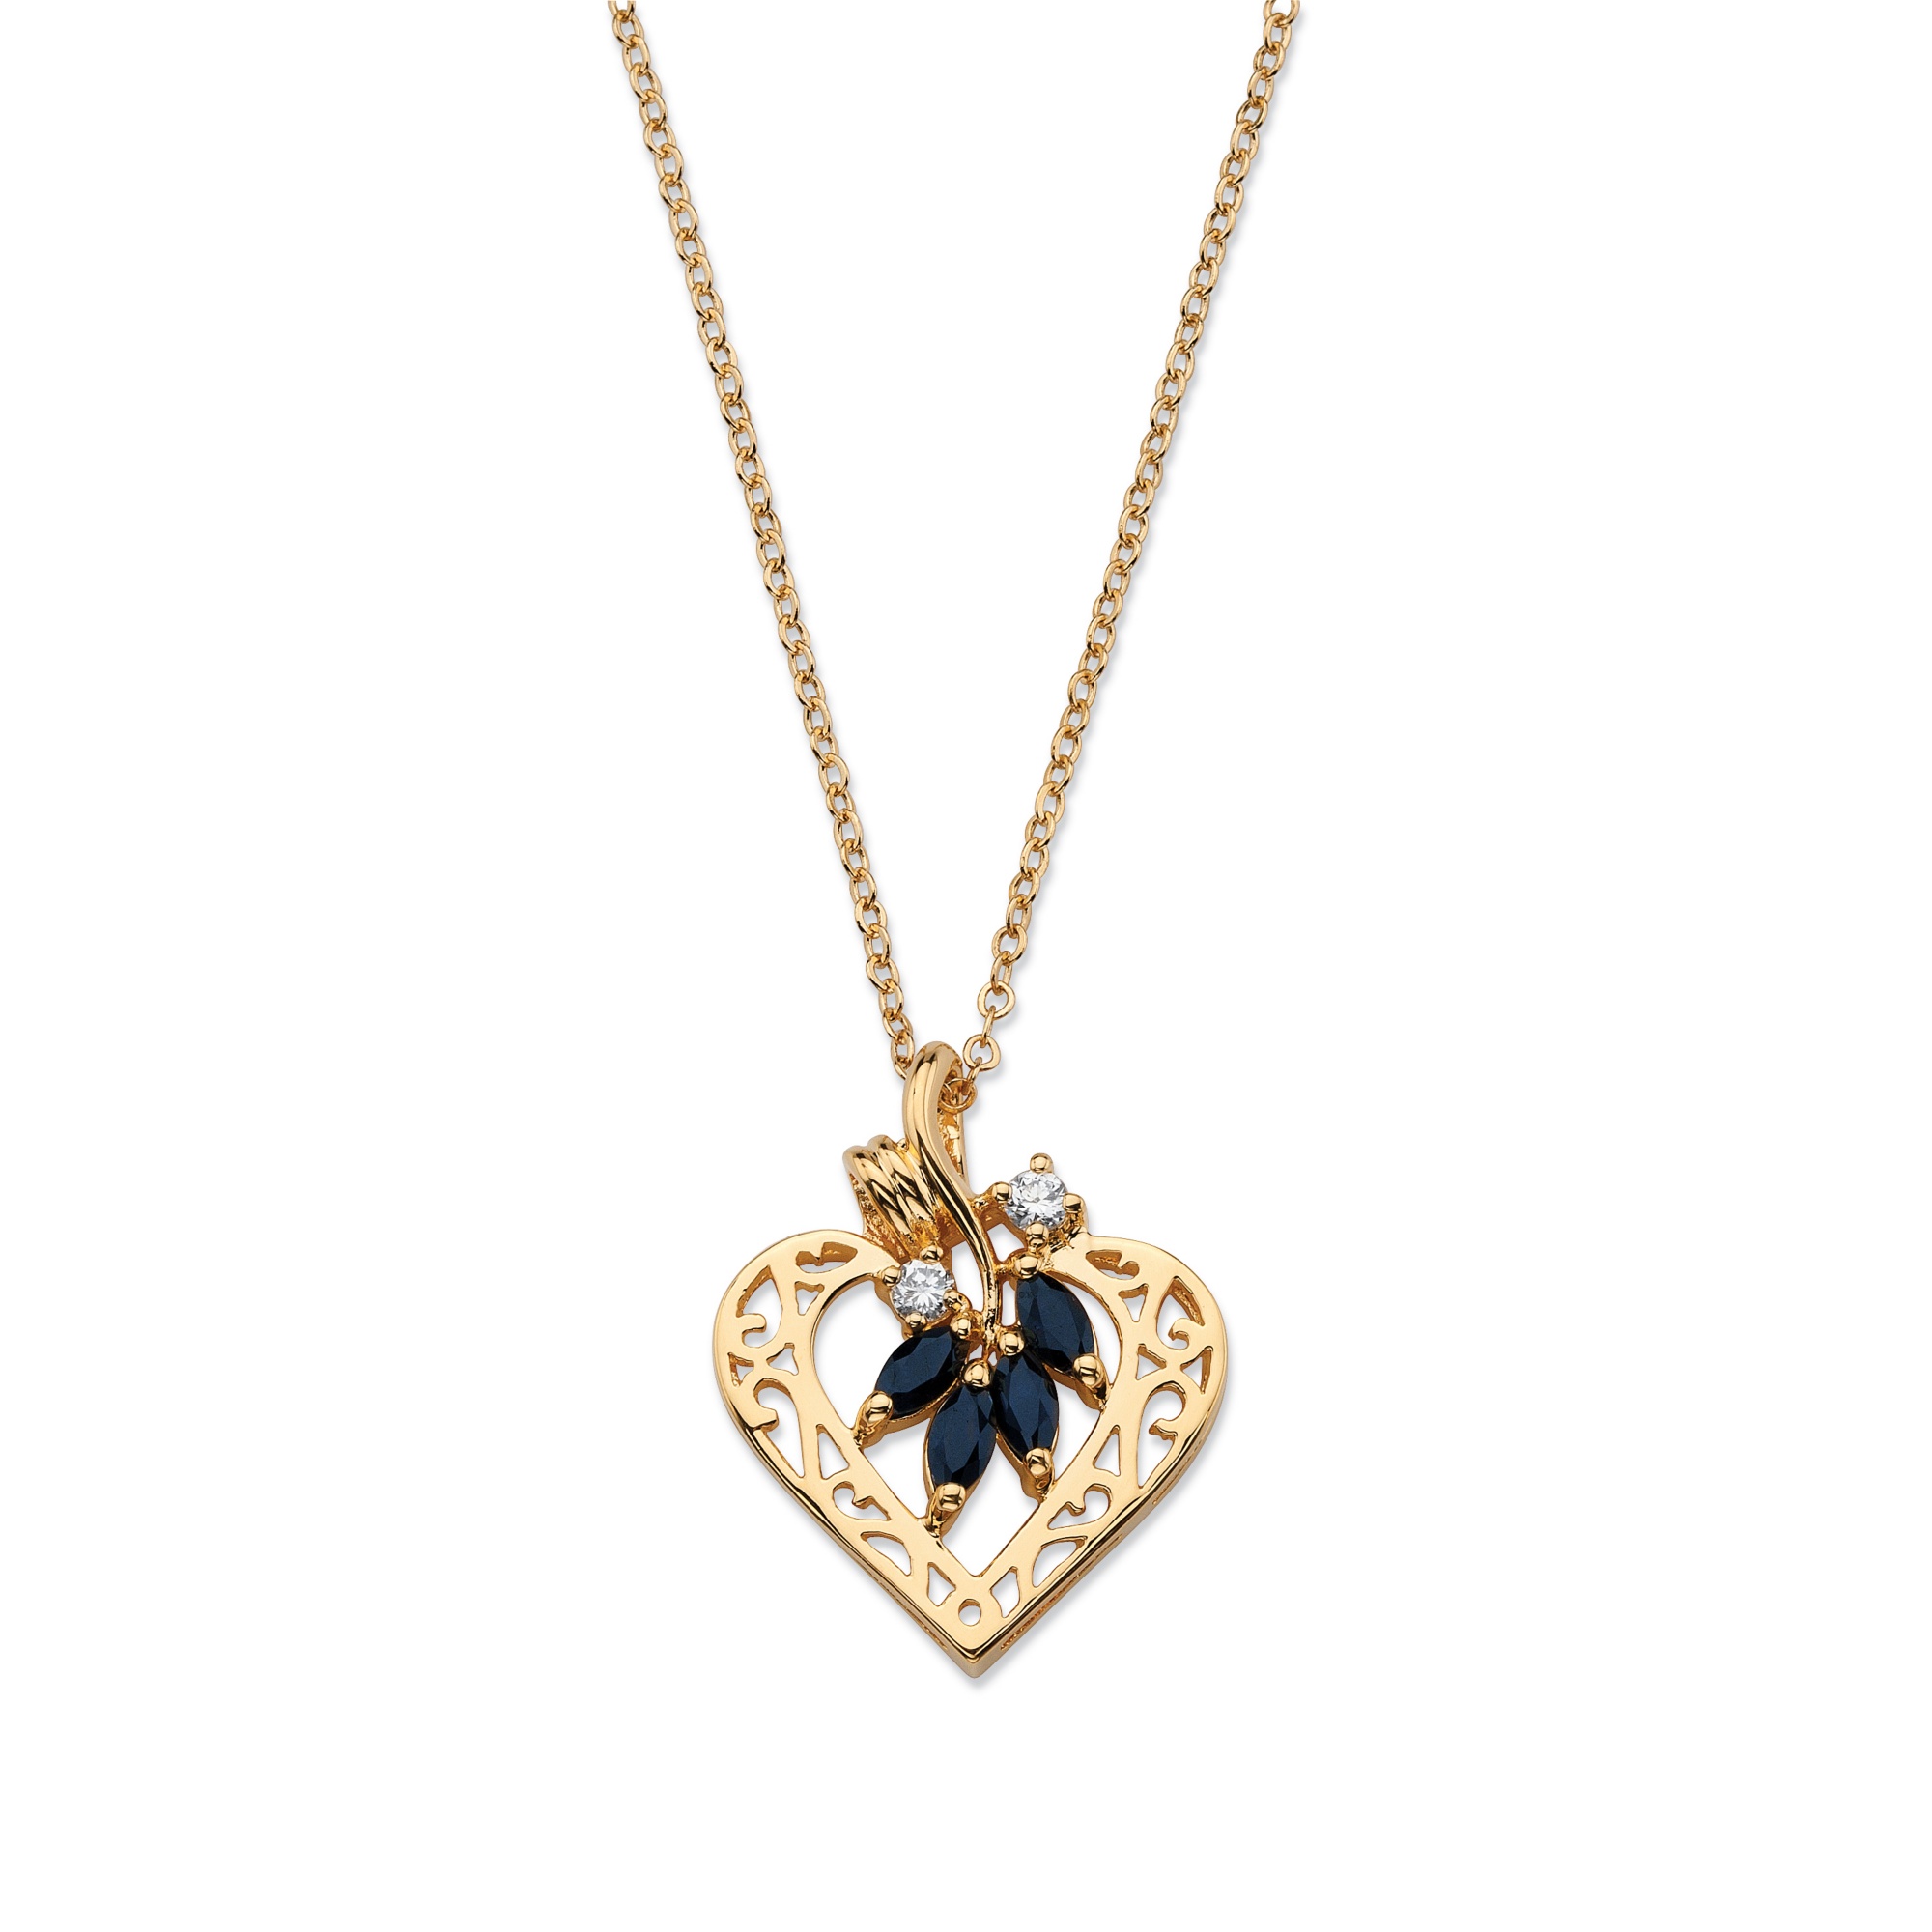 1.60 TCW Genuine Sapphire and Cubic Zirconia Heart Pendant Necklace in ...